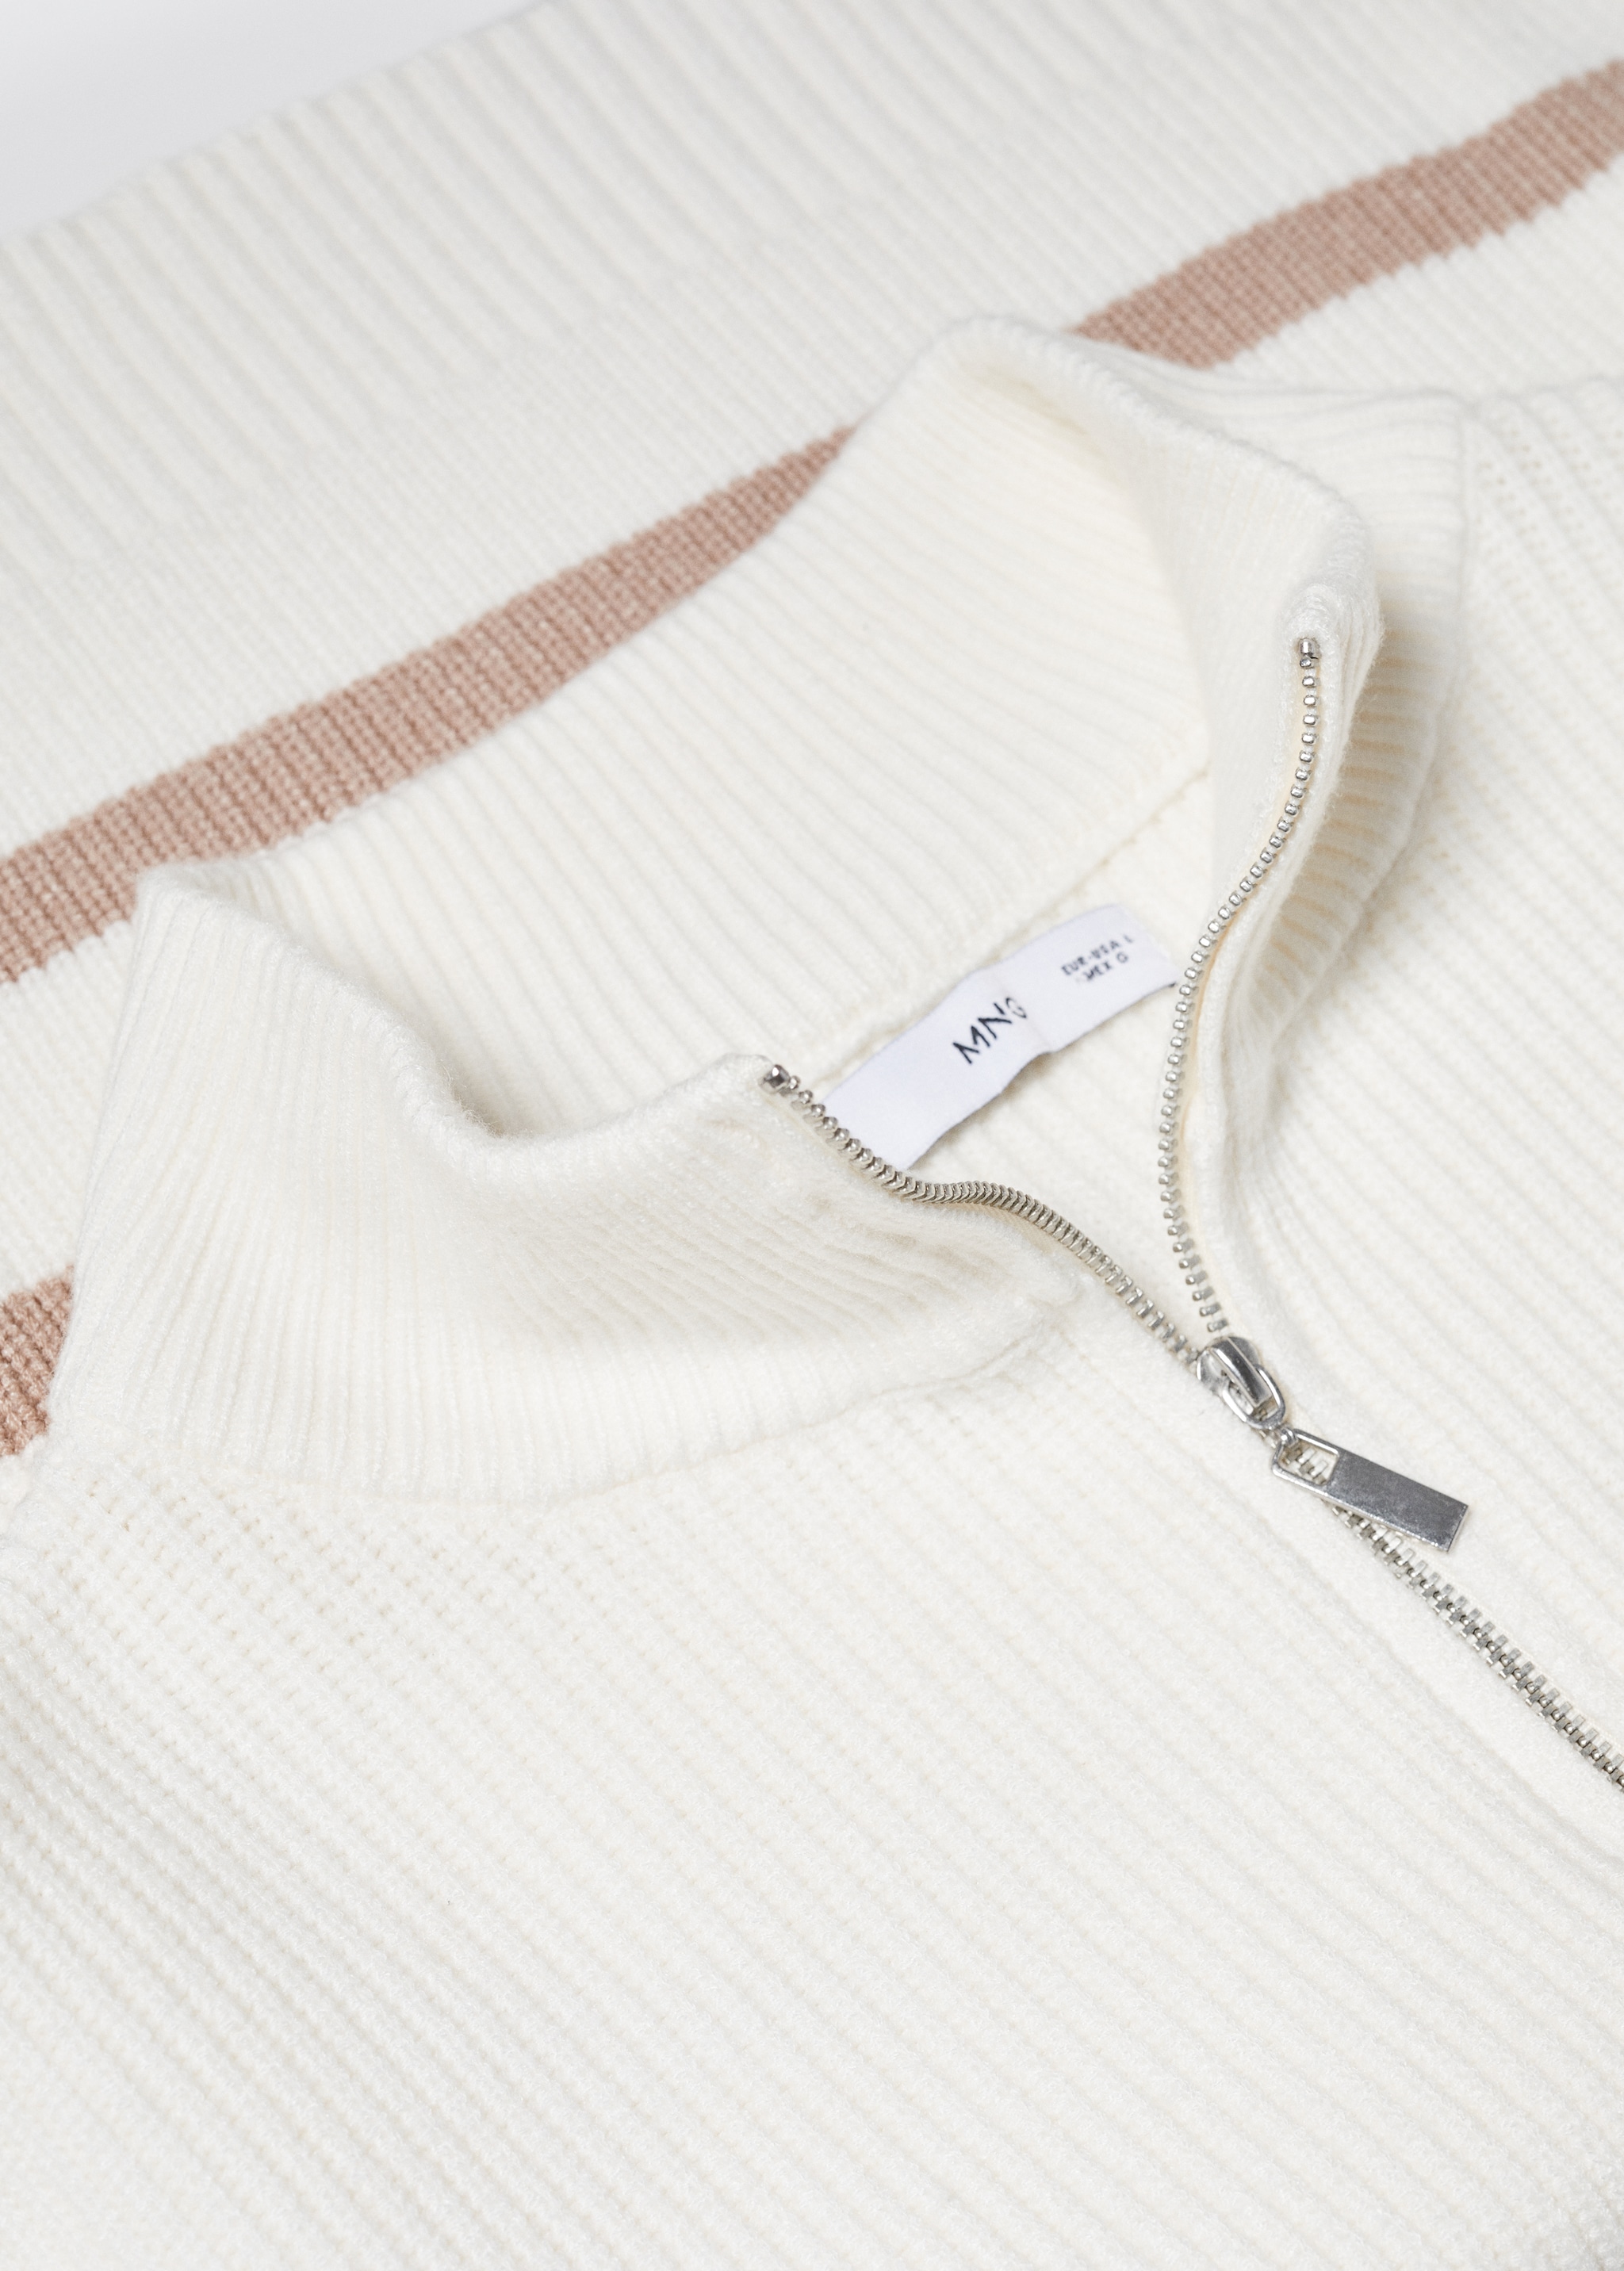 Striped sweater with zip - Details of the article 8